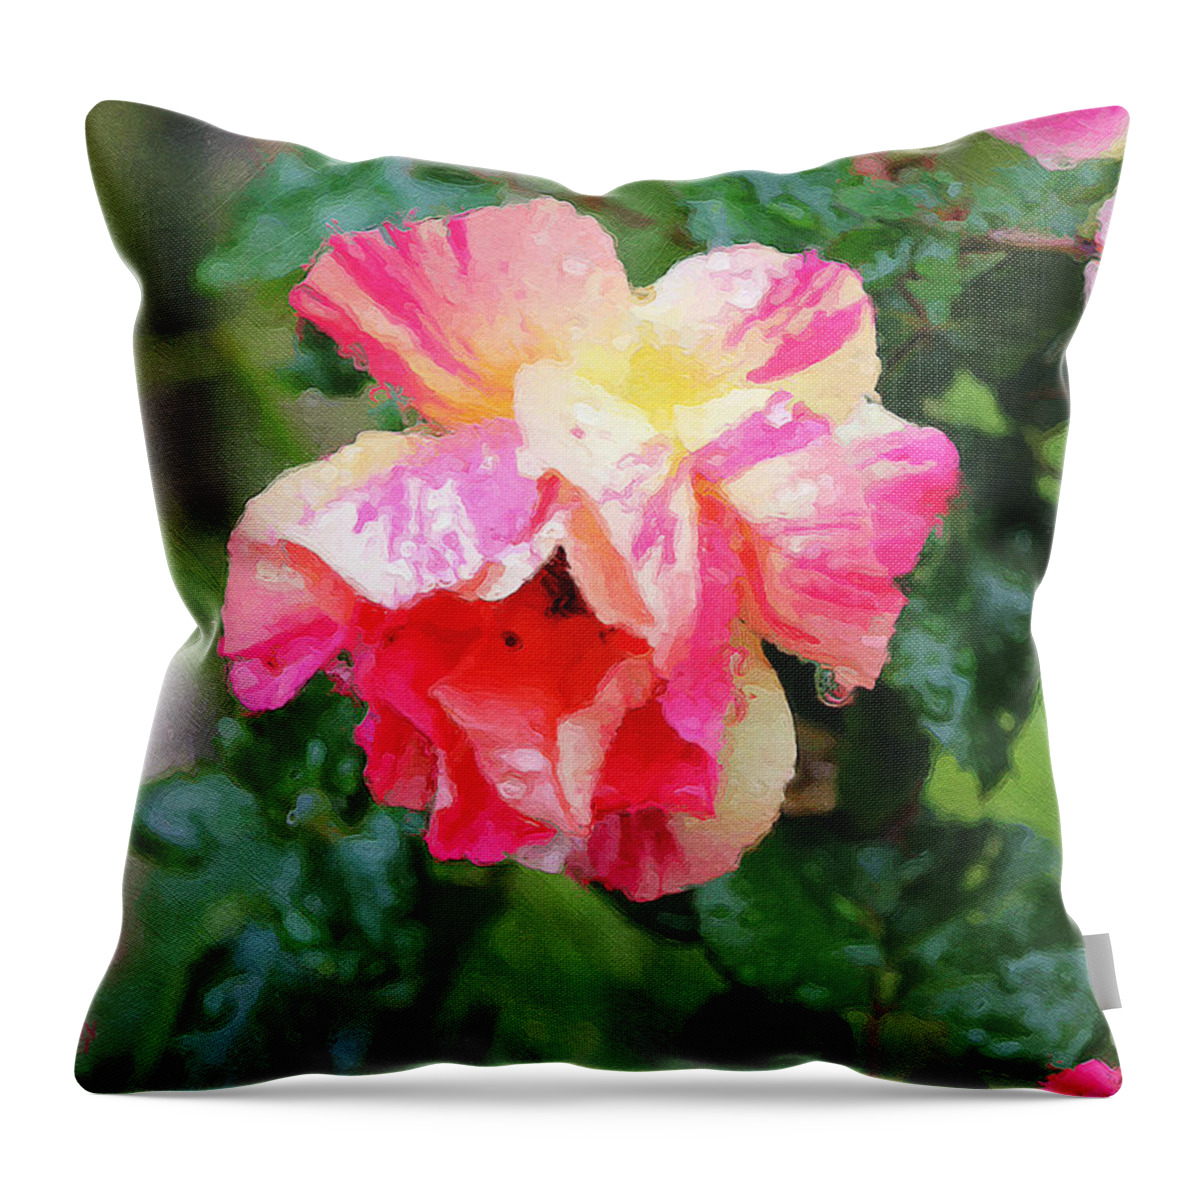 Rose Throw Pillow featuring the photograph Tyger Rose Burning Bright by Brian Watt